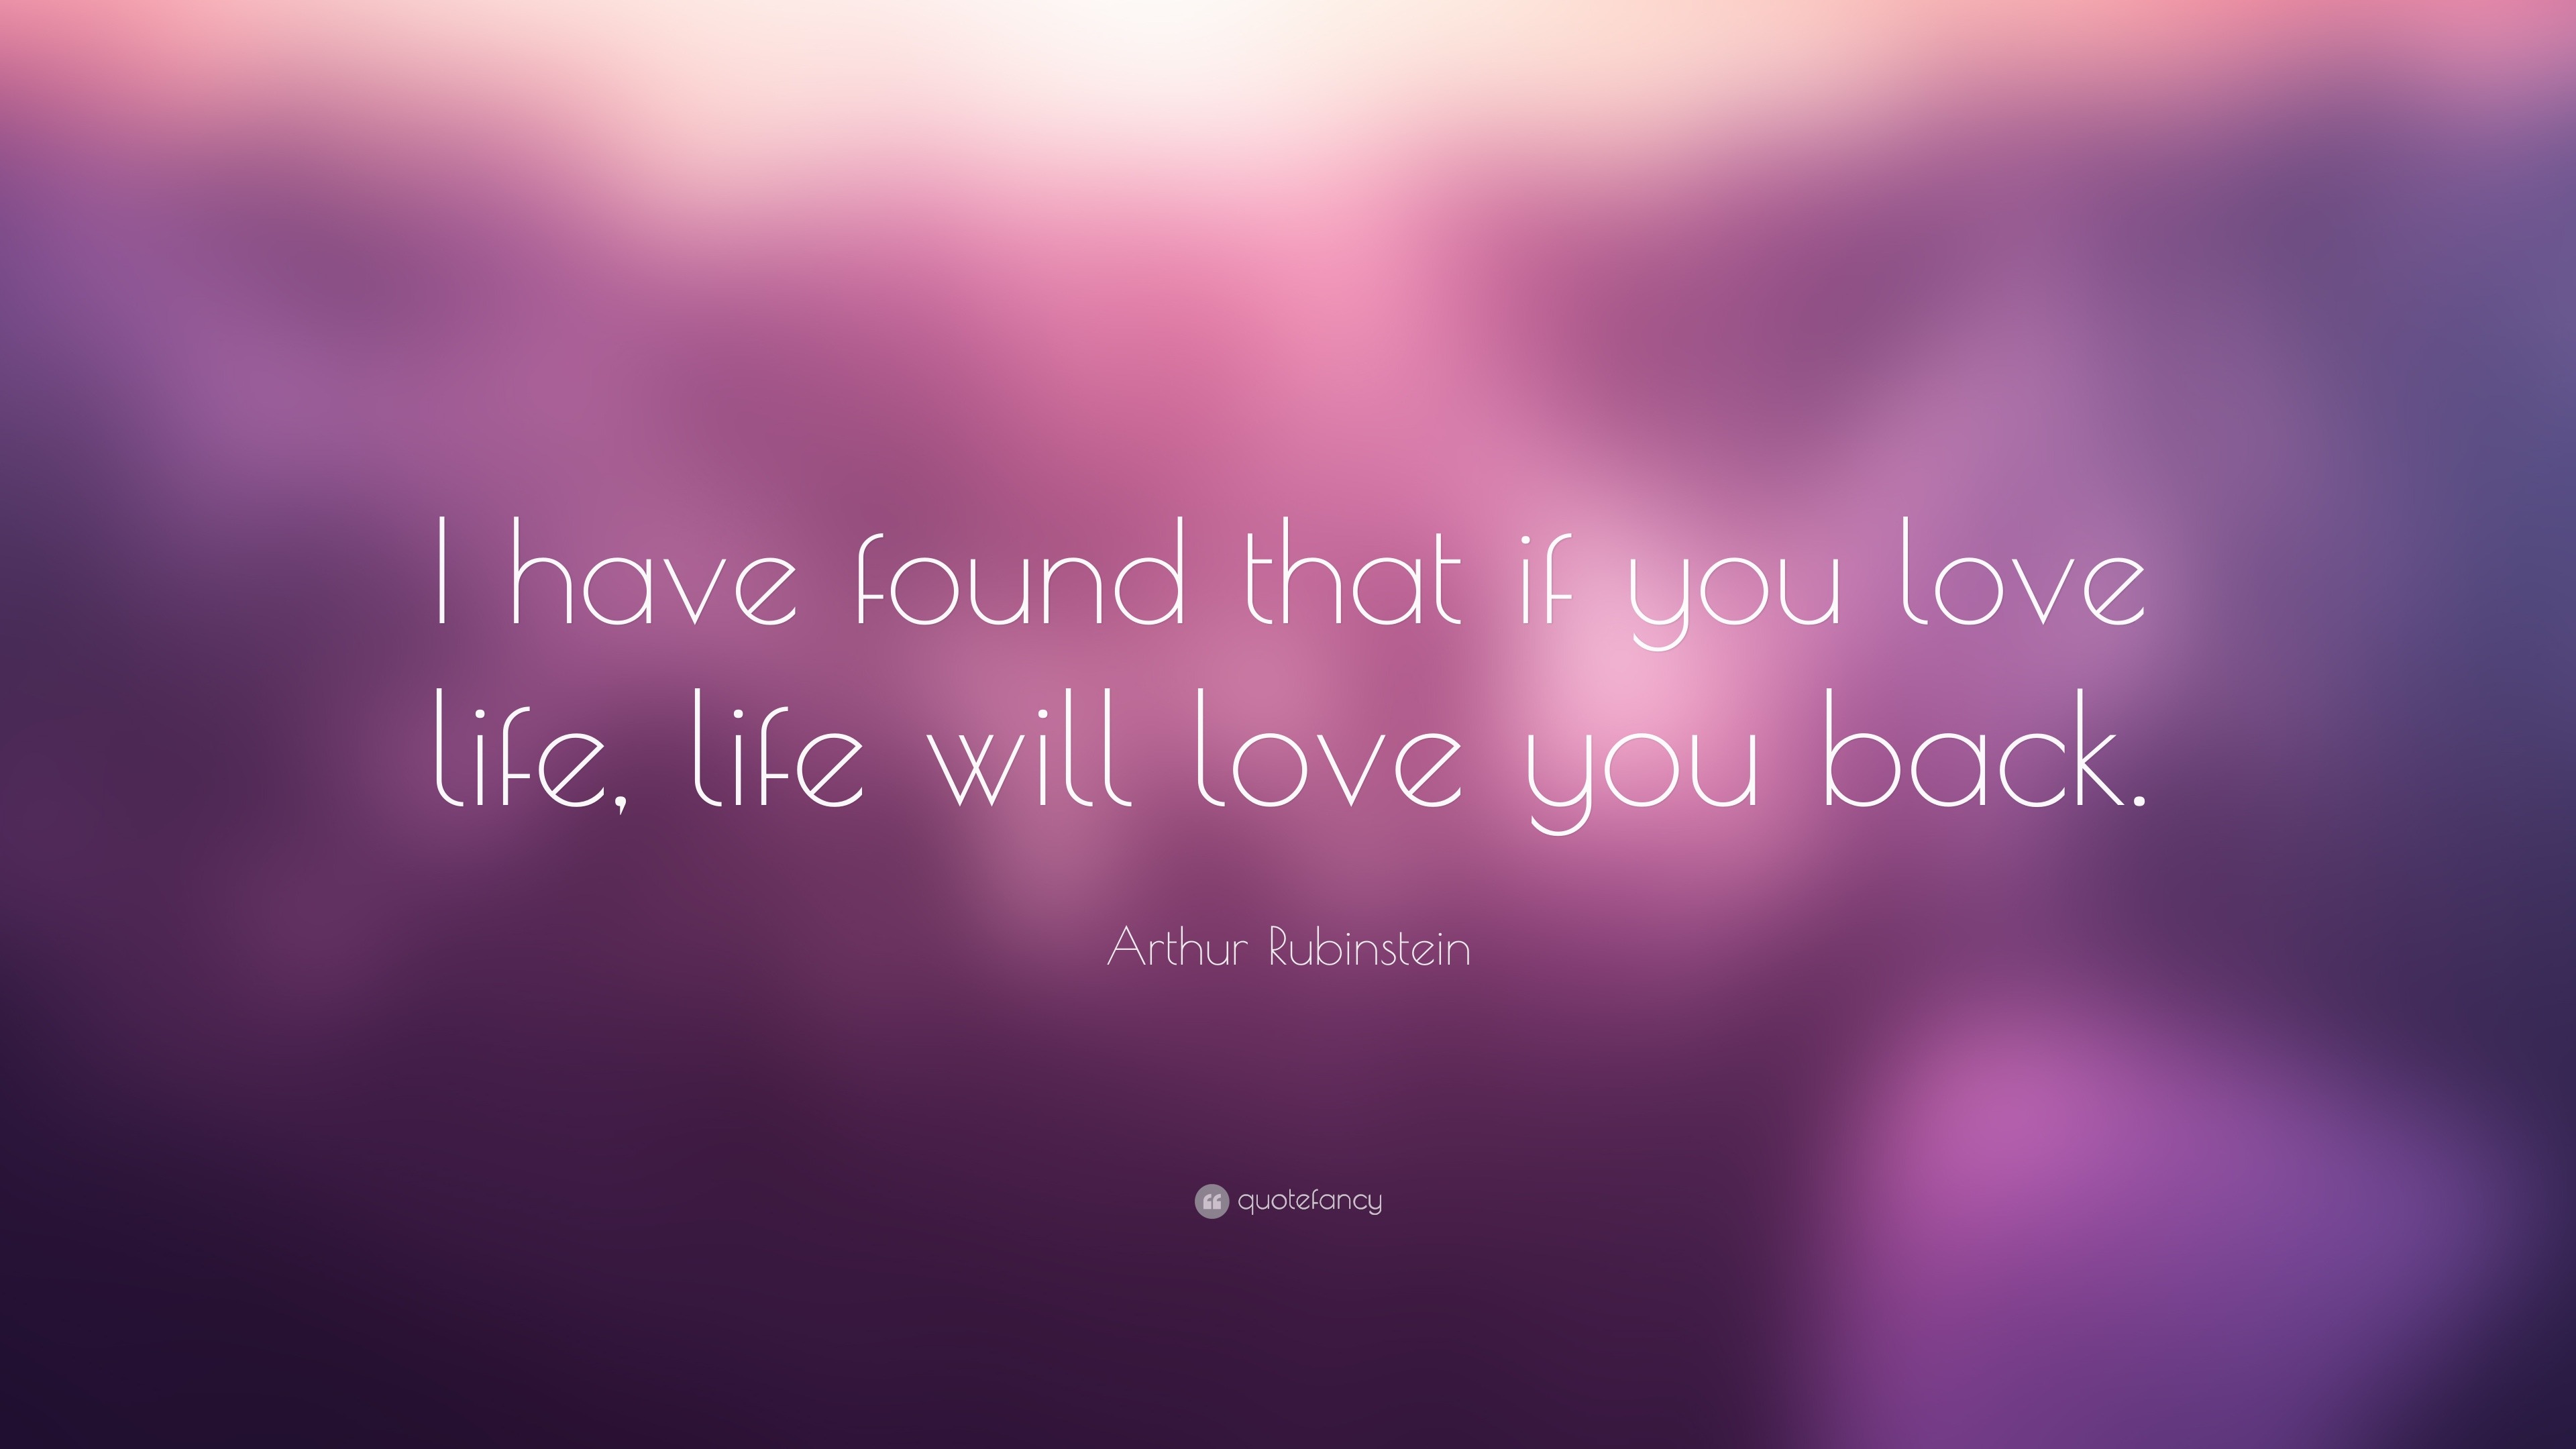 Arthur Rubinstein Quote “I have found that if you love life life will